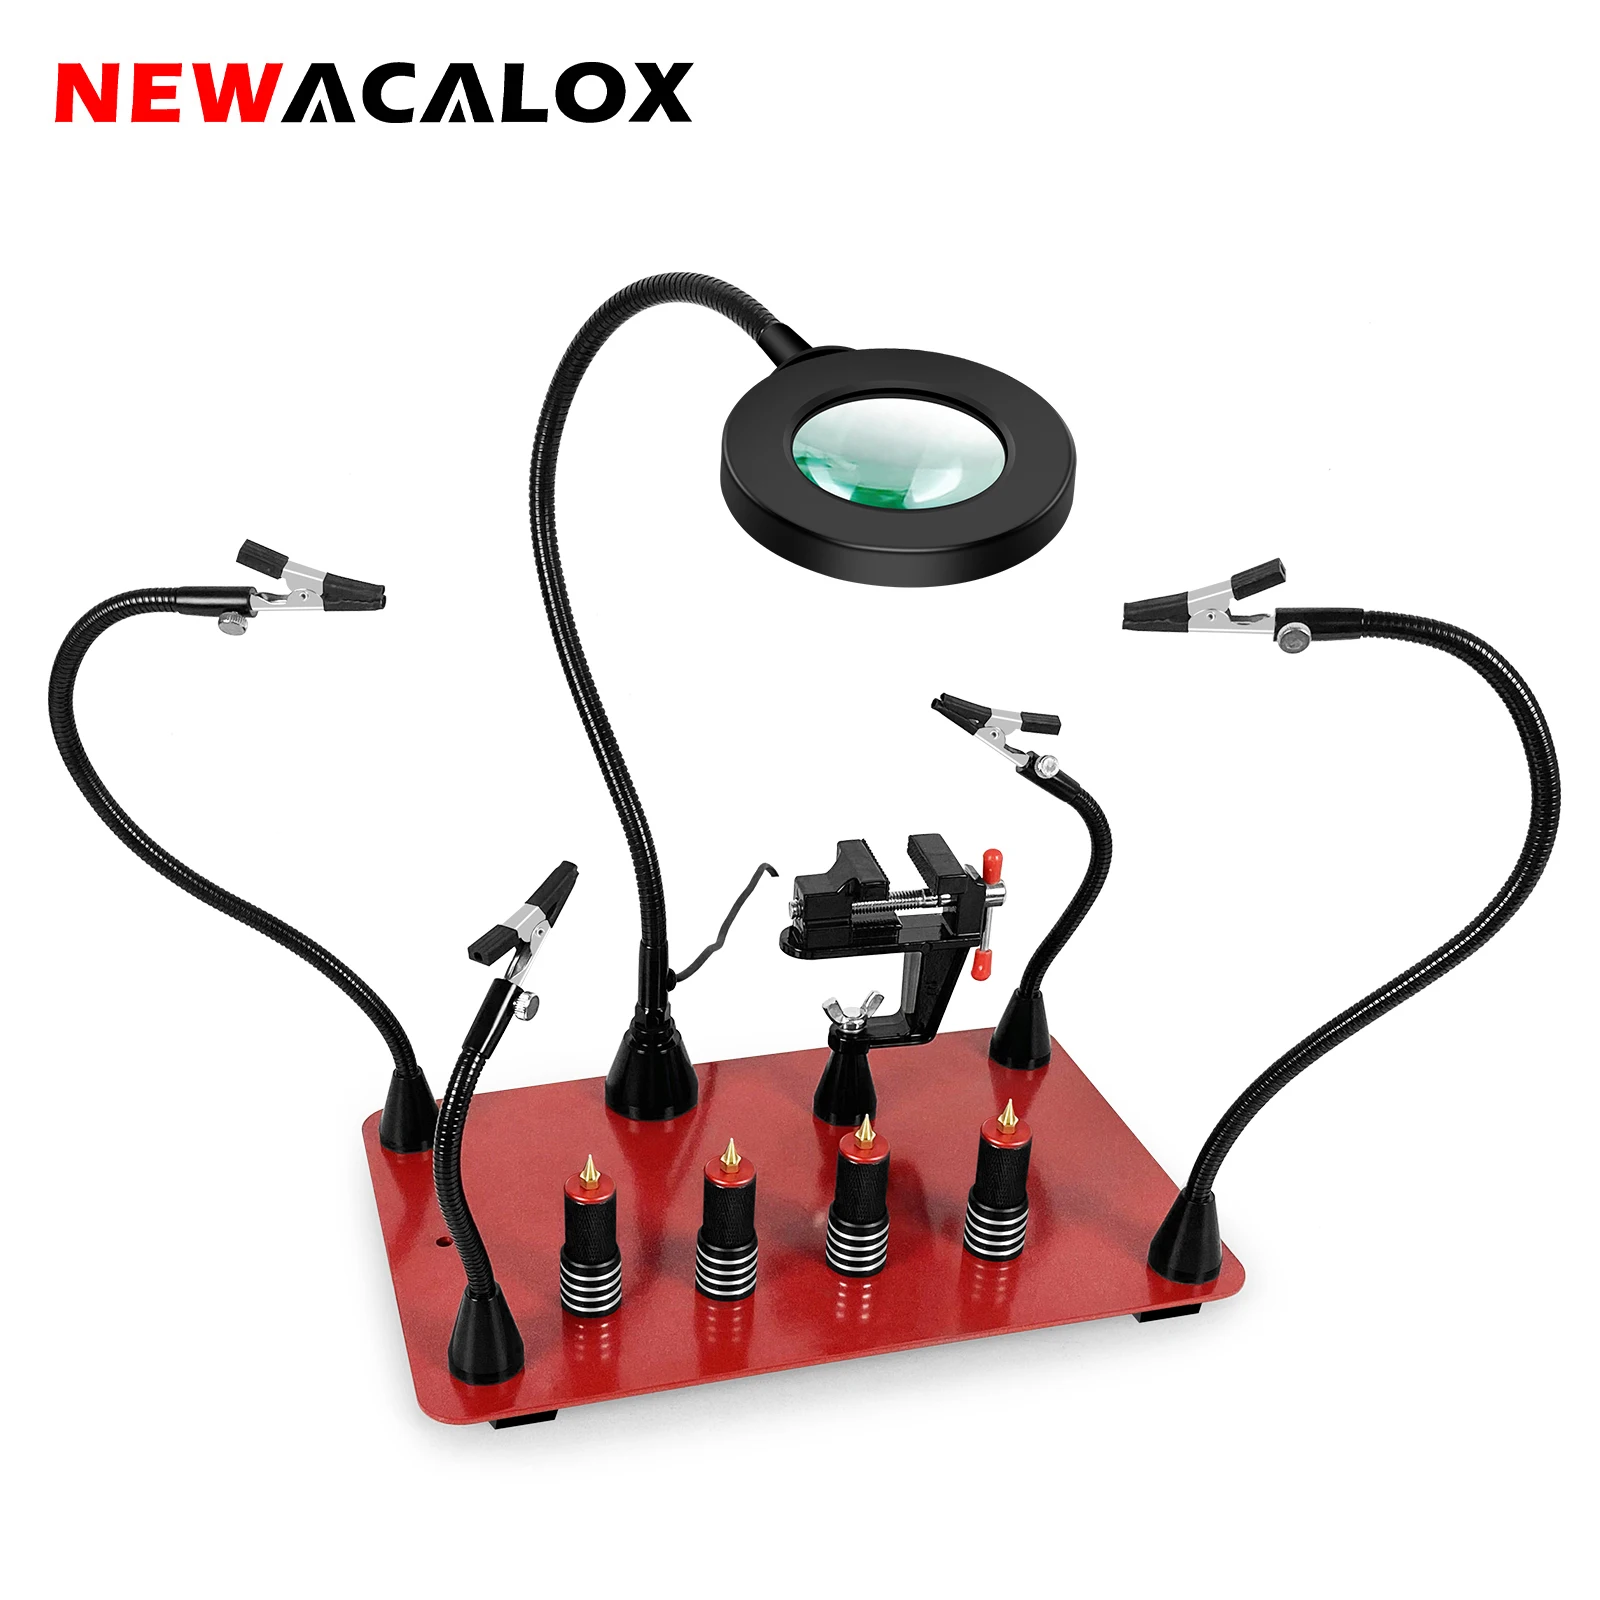 NEWACALOX  Magnetic Soldering Third Hand PCB Holder Heat Gun Stand with 3X LED Magnifying Glass Heavy Duty Welding Workstation newacalox soldering helping hands third hand tools with large vise base soldering iron tips cleaner ball 3x led magnifying lamp